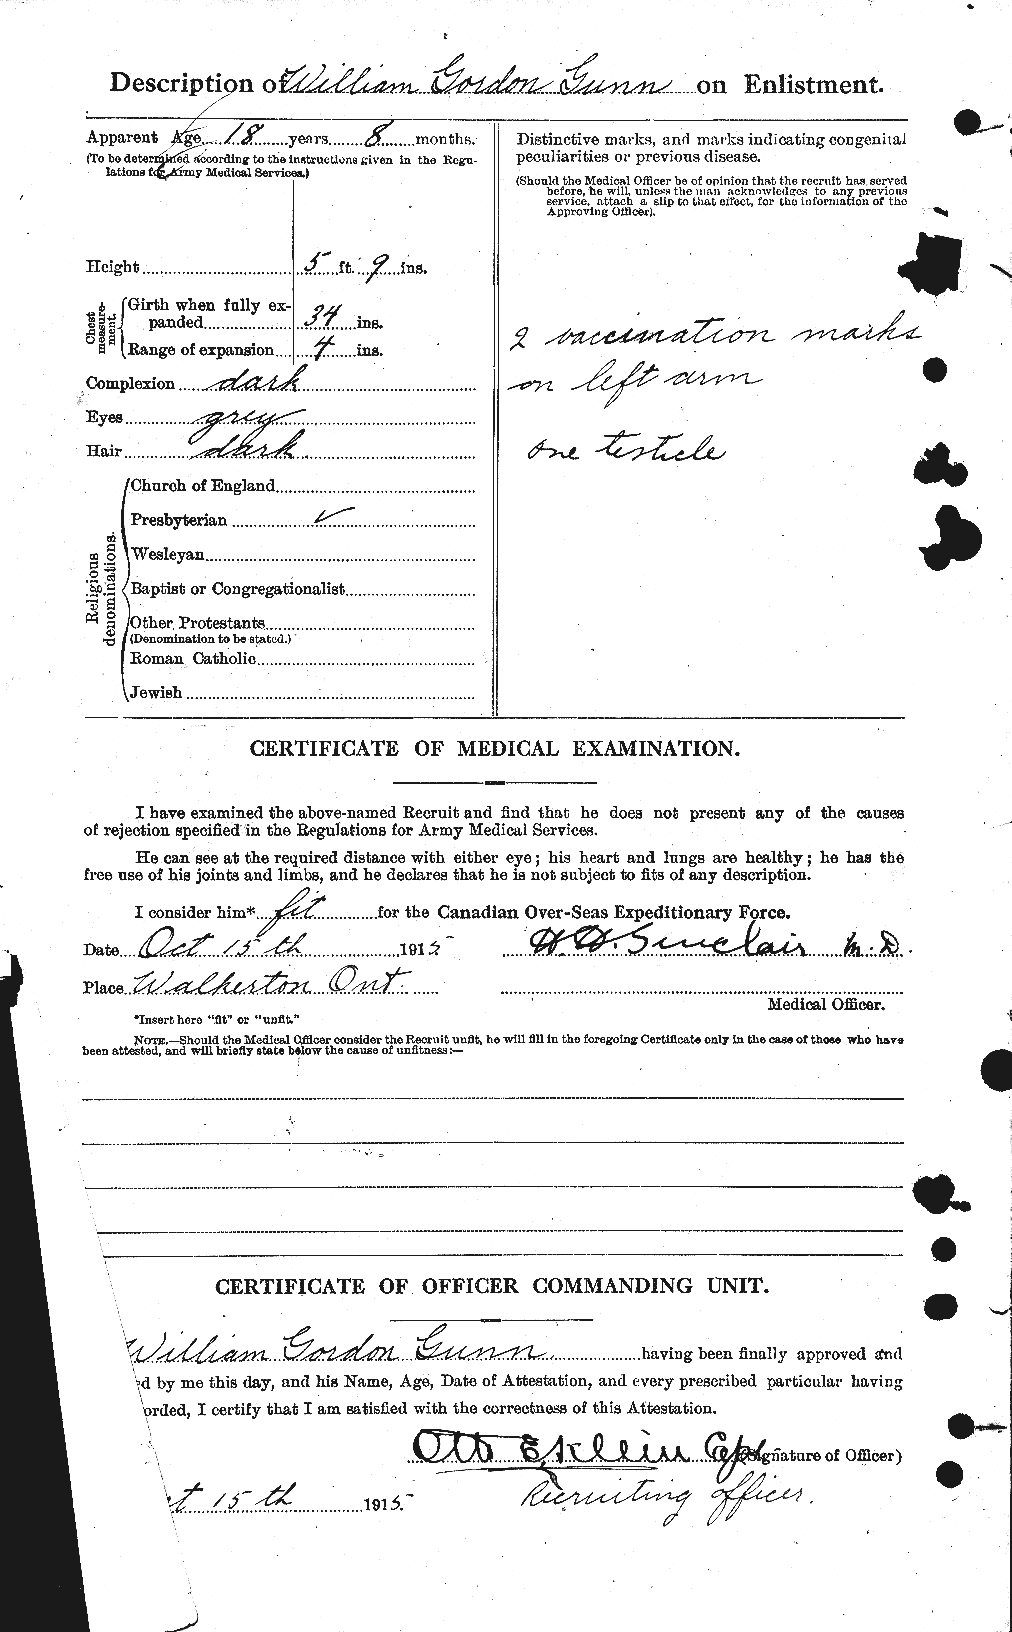 Personnel Records of the First World War - CEF 369367b